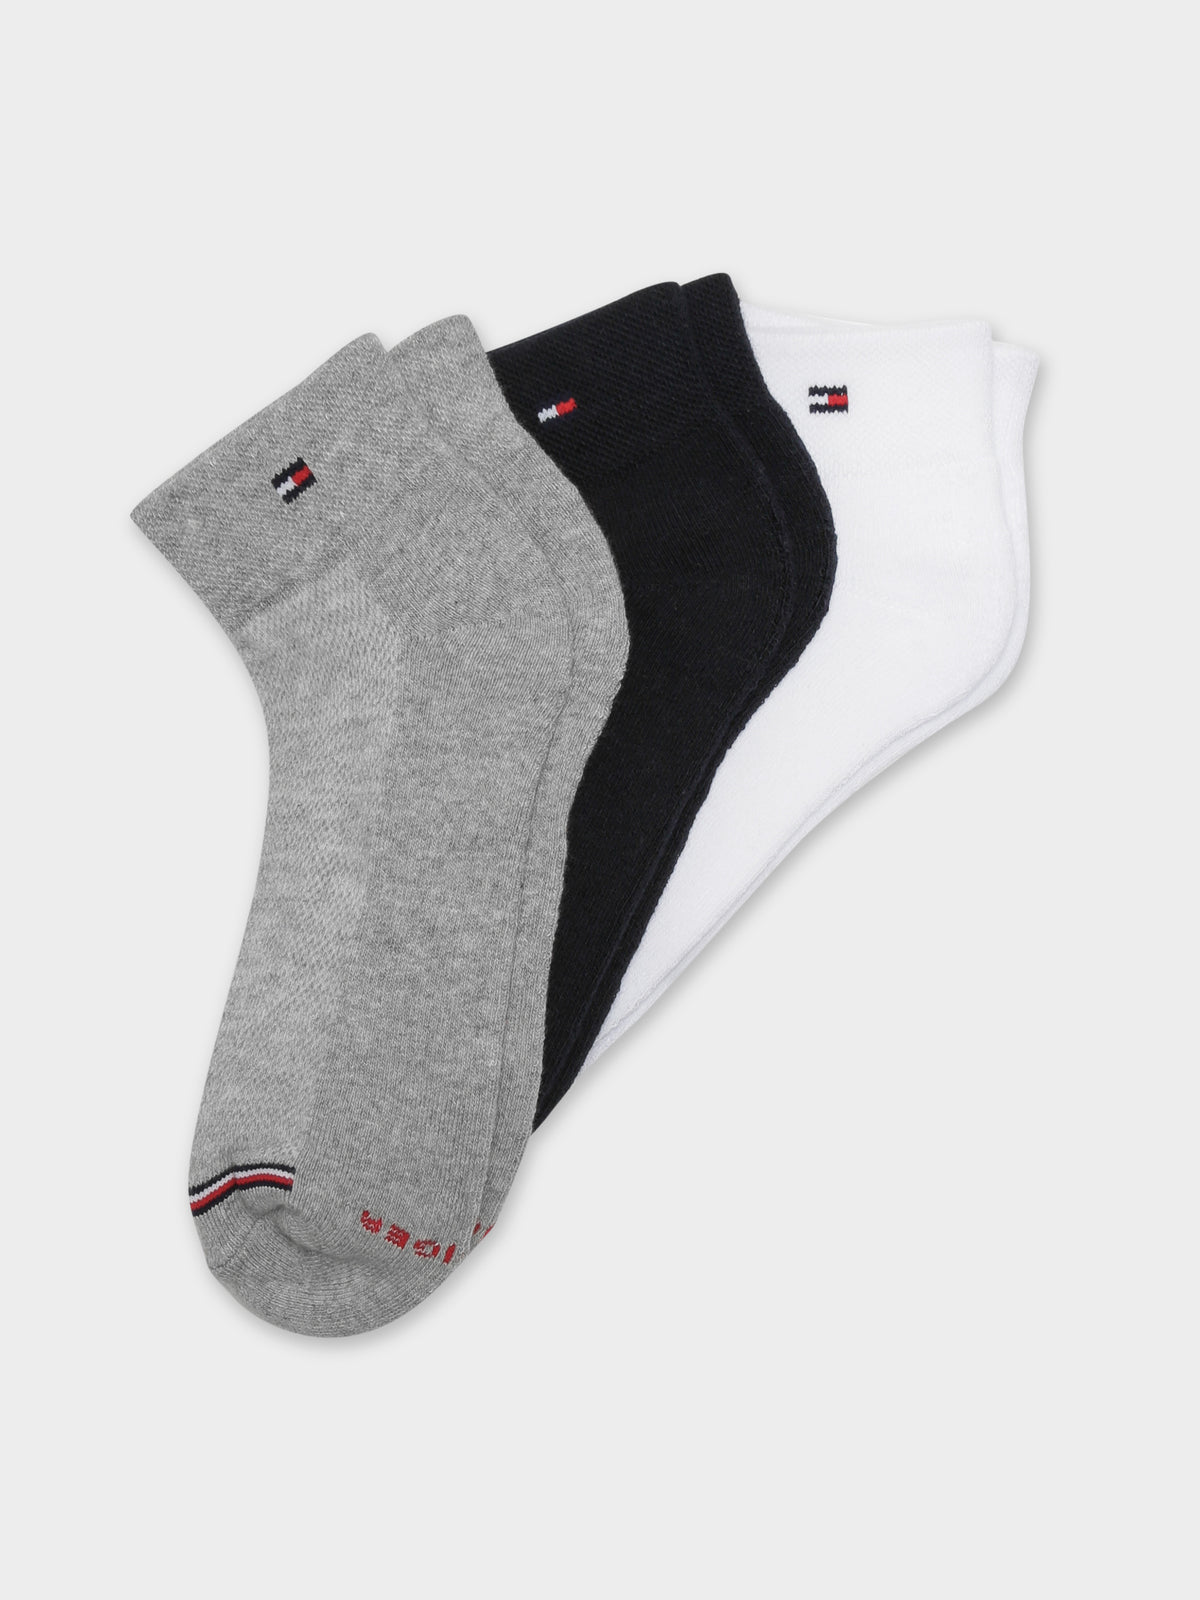 3 Pairs of Cushion Sole Socks in Grey, Navy &amp; White